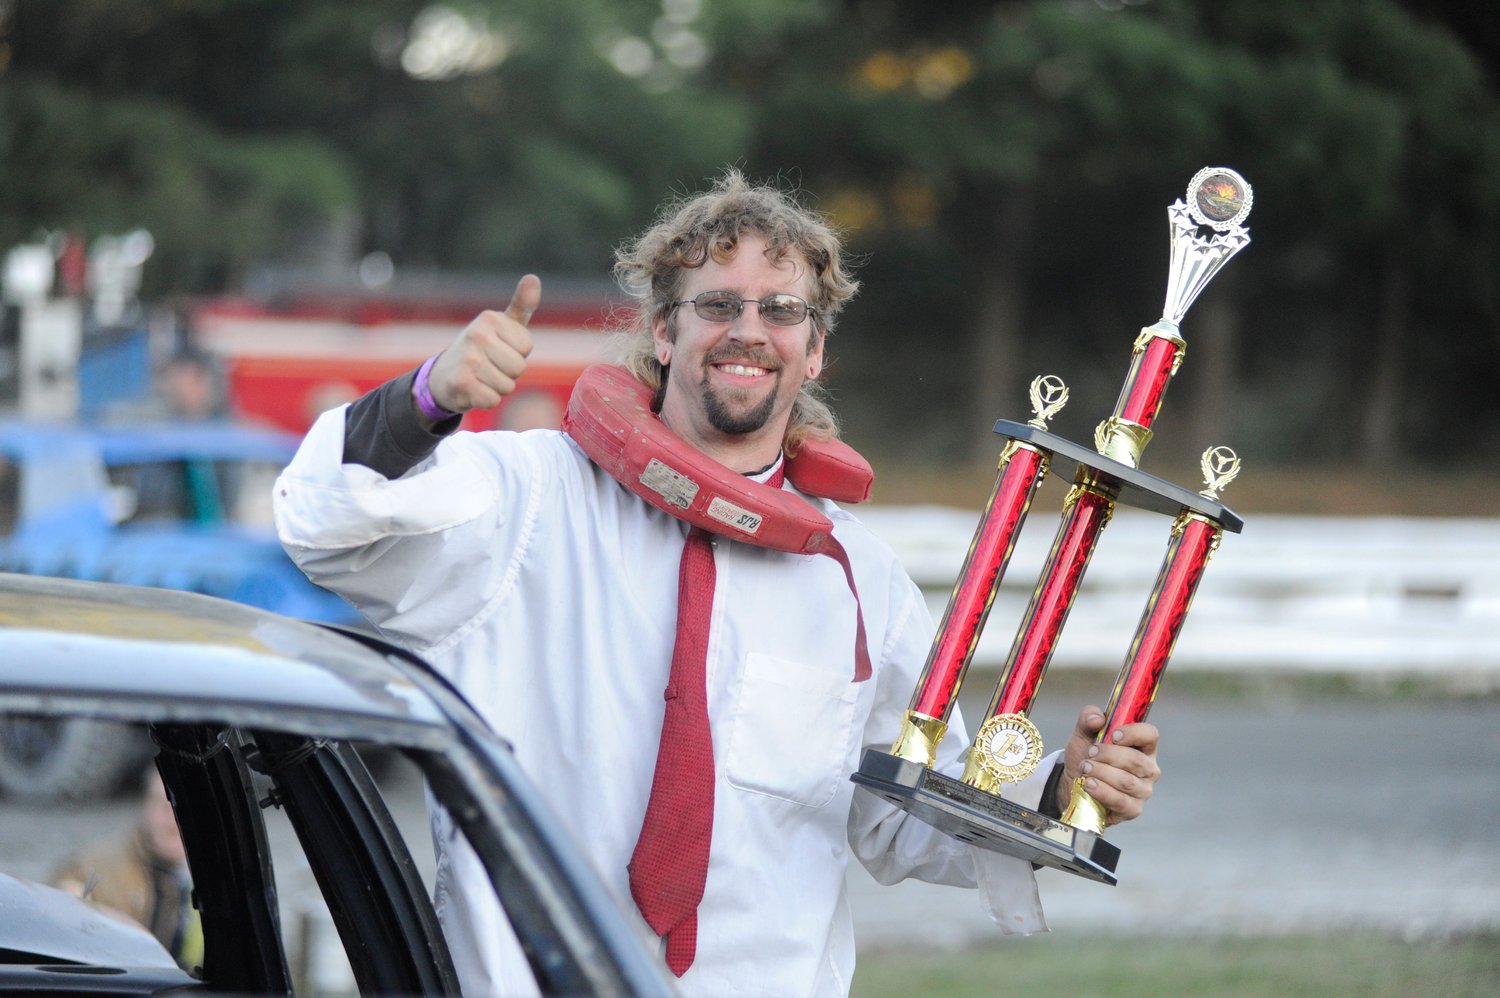 Dressed for success. The first-place trophy in the bone stock V8 class went to Jereme Spanburgh, of Scranton, PA, who engaged in an epic battle with the driver of demo car #17 that, along with his car, was a testament to the strength of American steel. Asked about his red tie, Spanburgh said he always tries to look his best at demolition derbies.